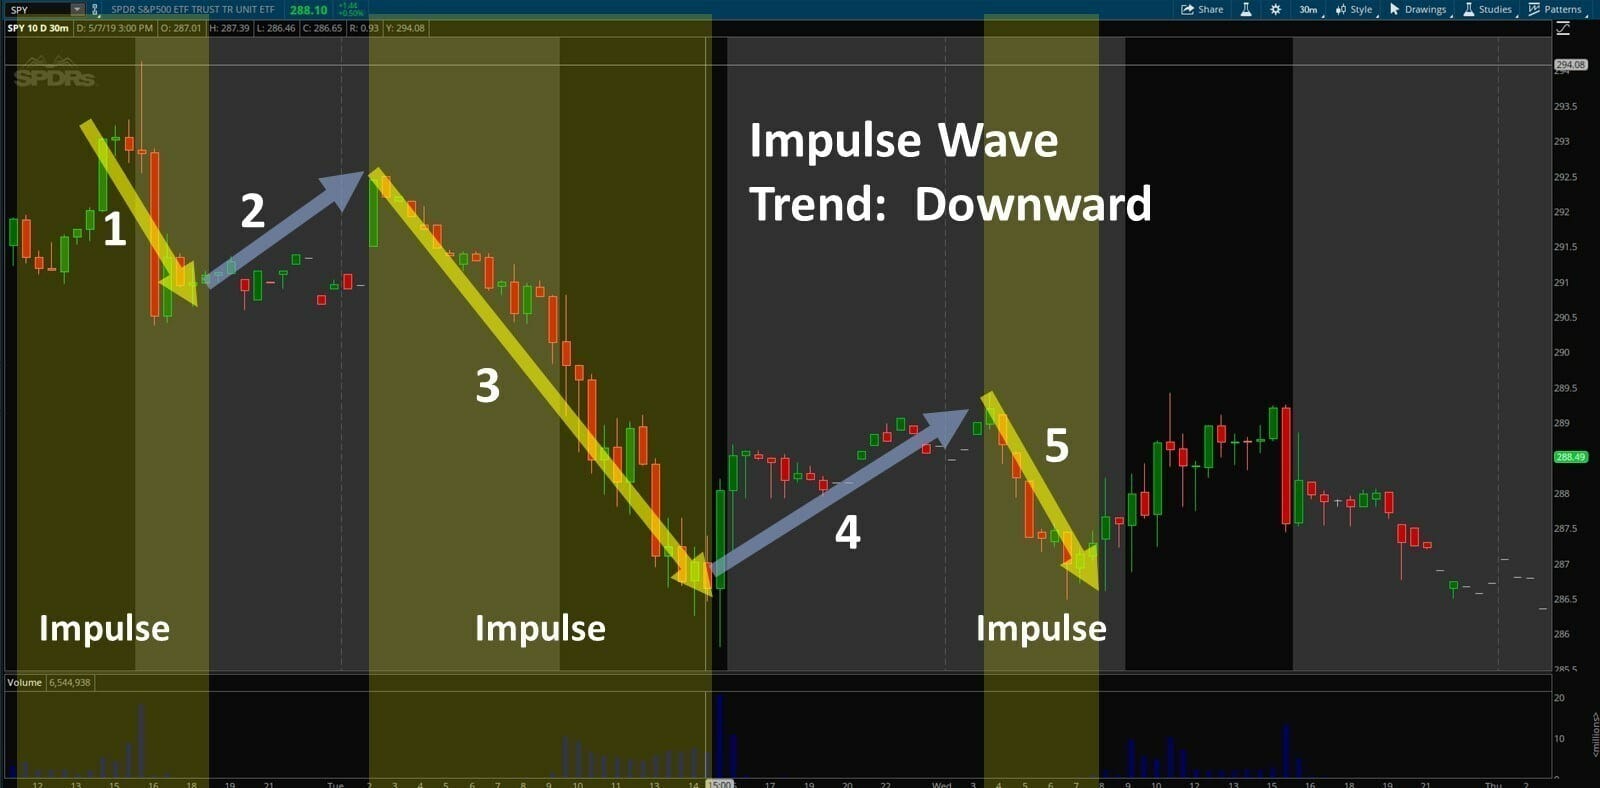 A chart illustrating that the third impulse wave usually indicates the biggest move in the market.